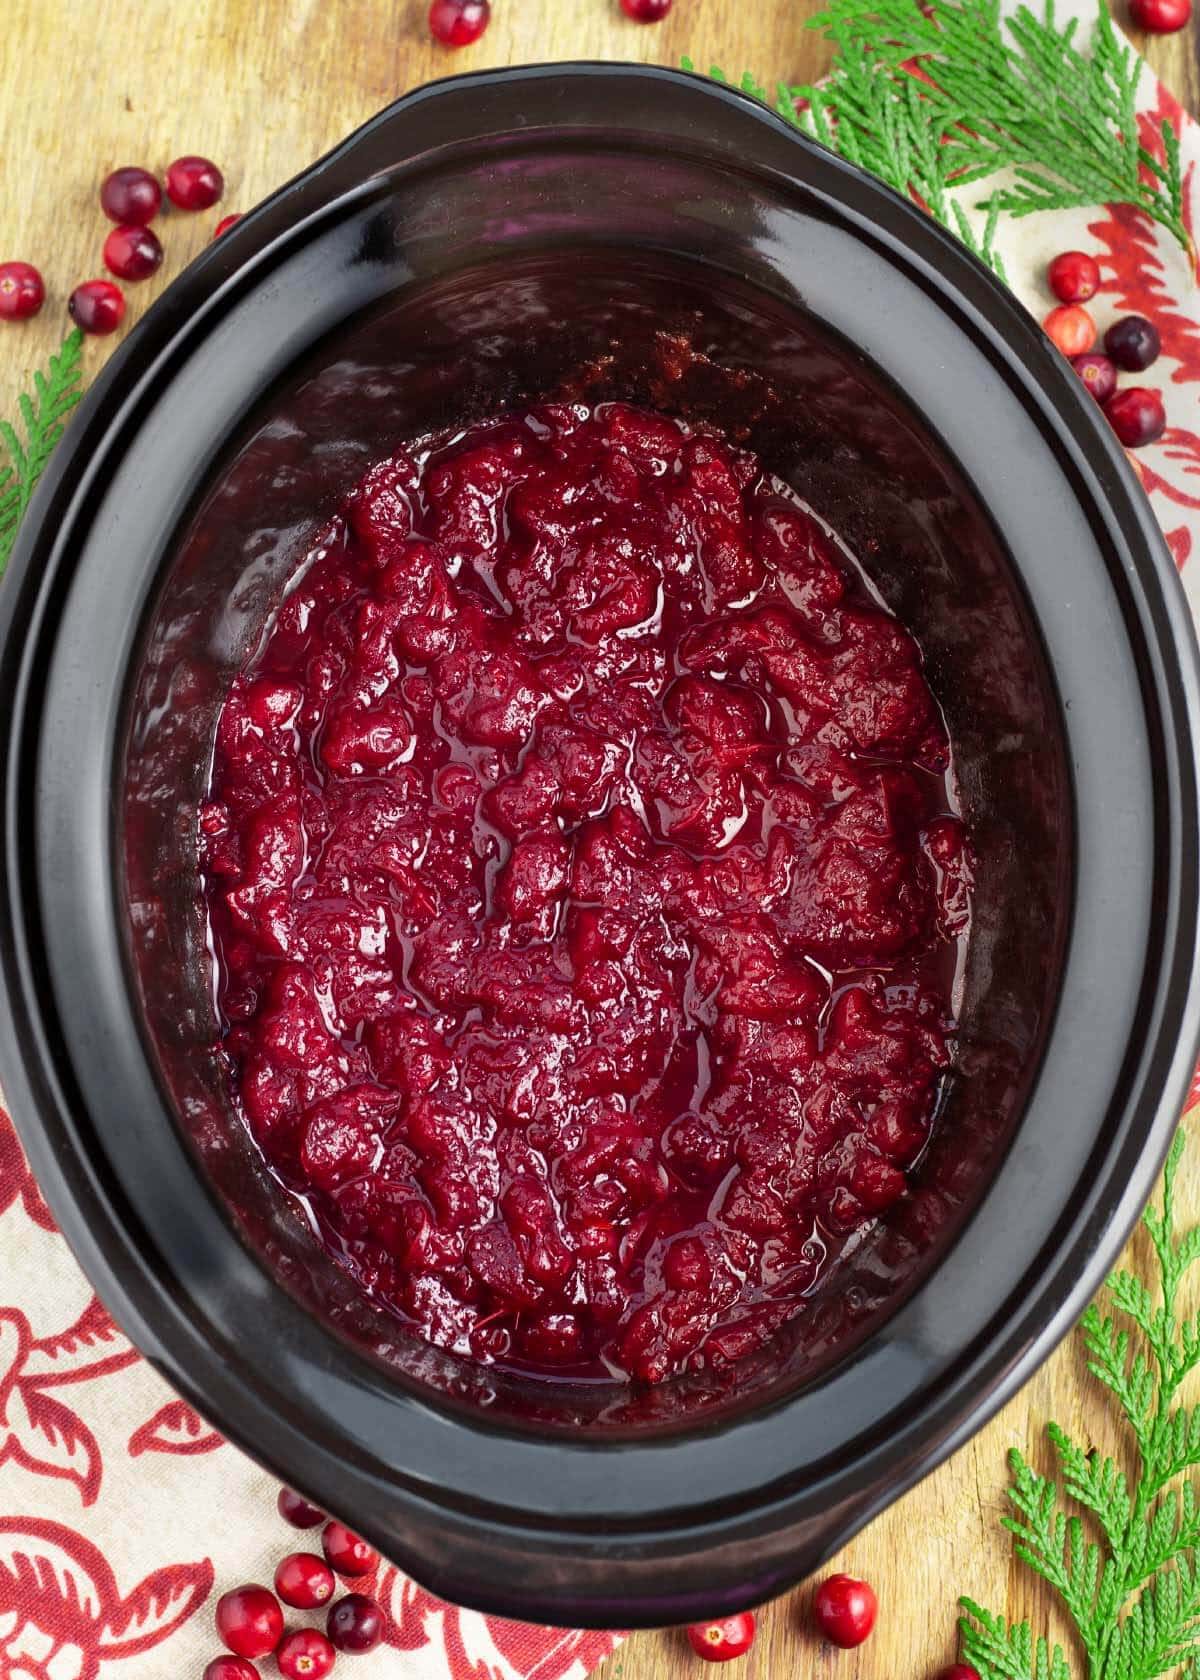 Cranberry sauce cooked in the crock pot